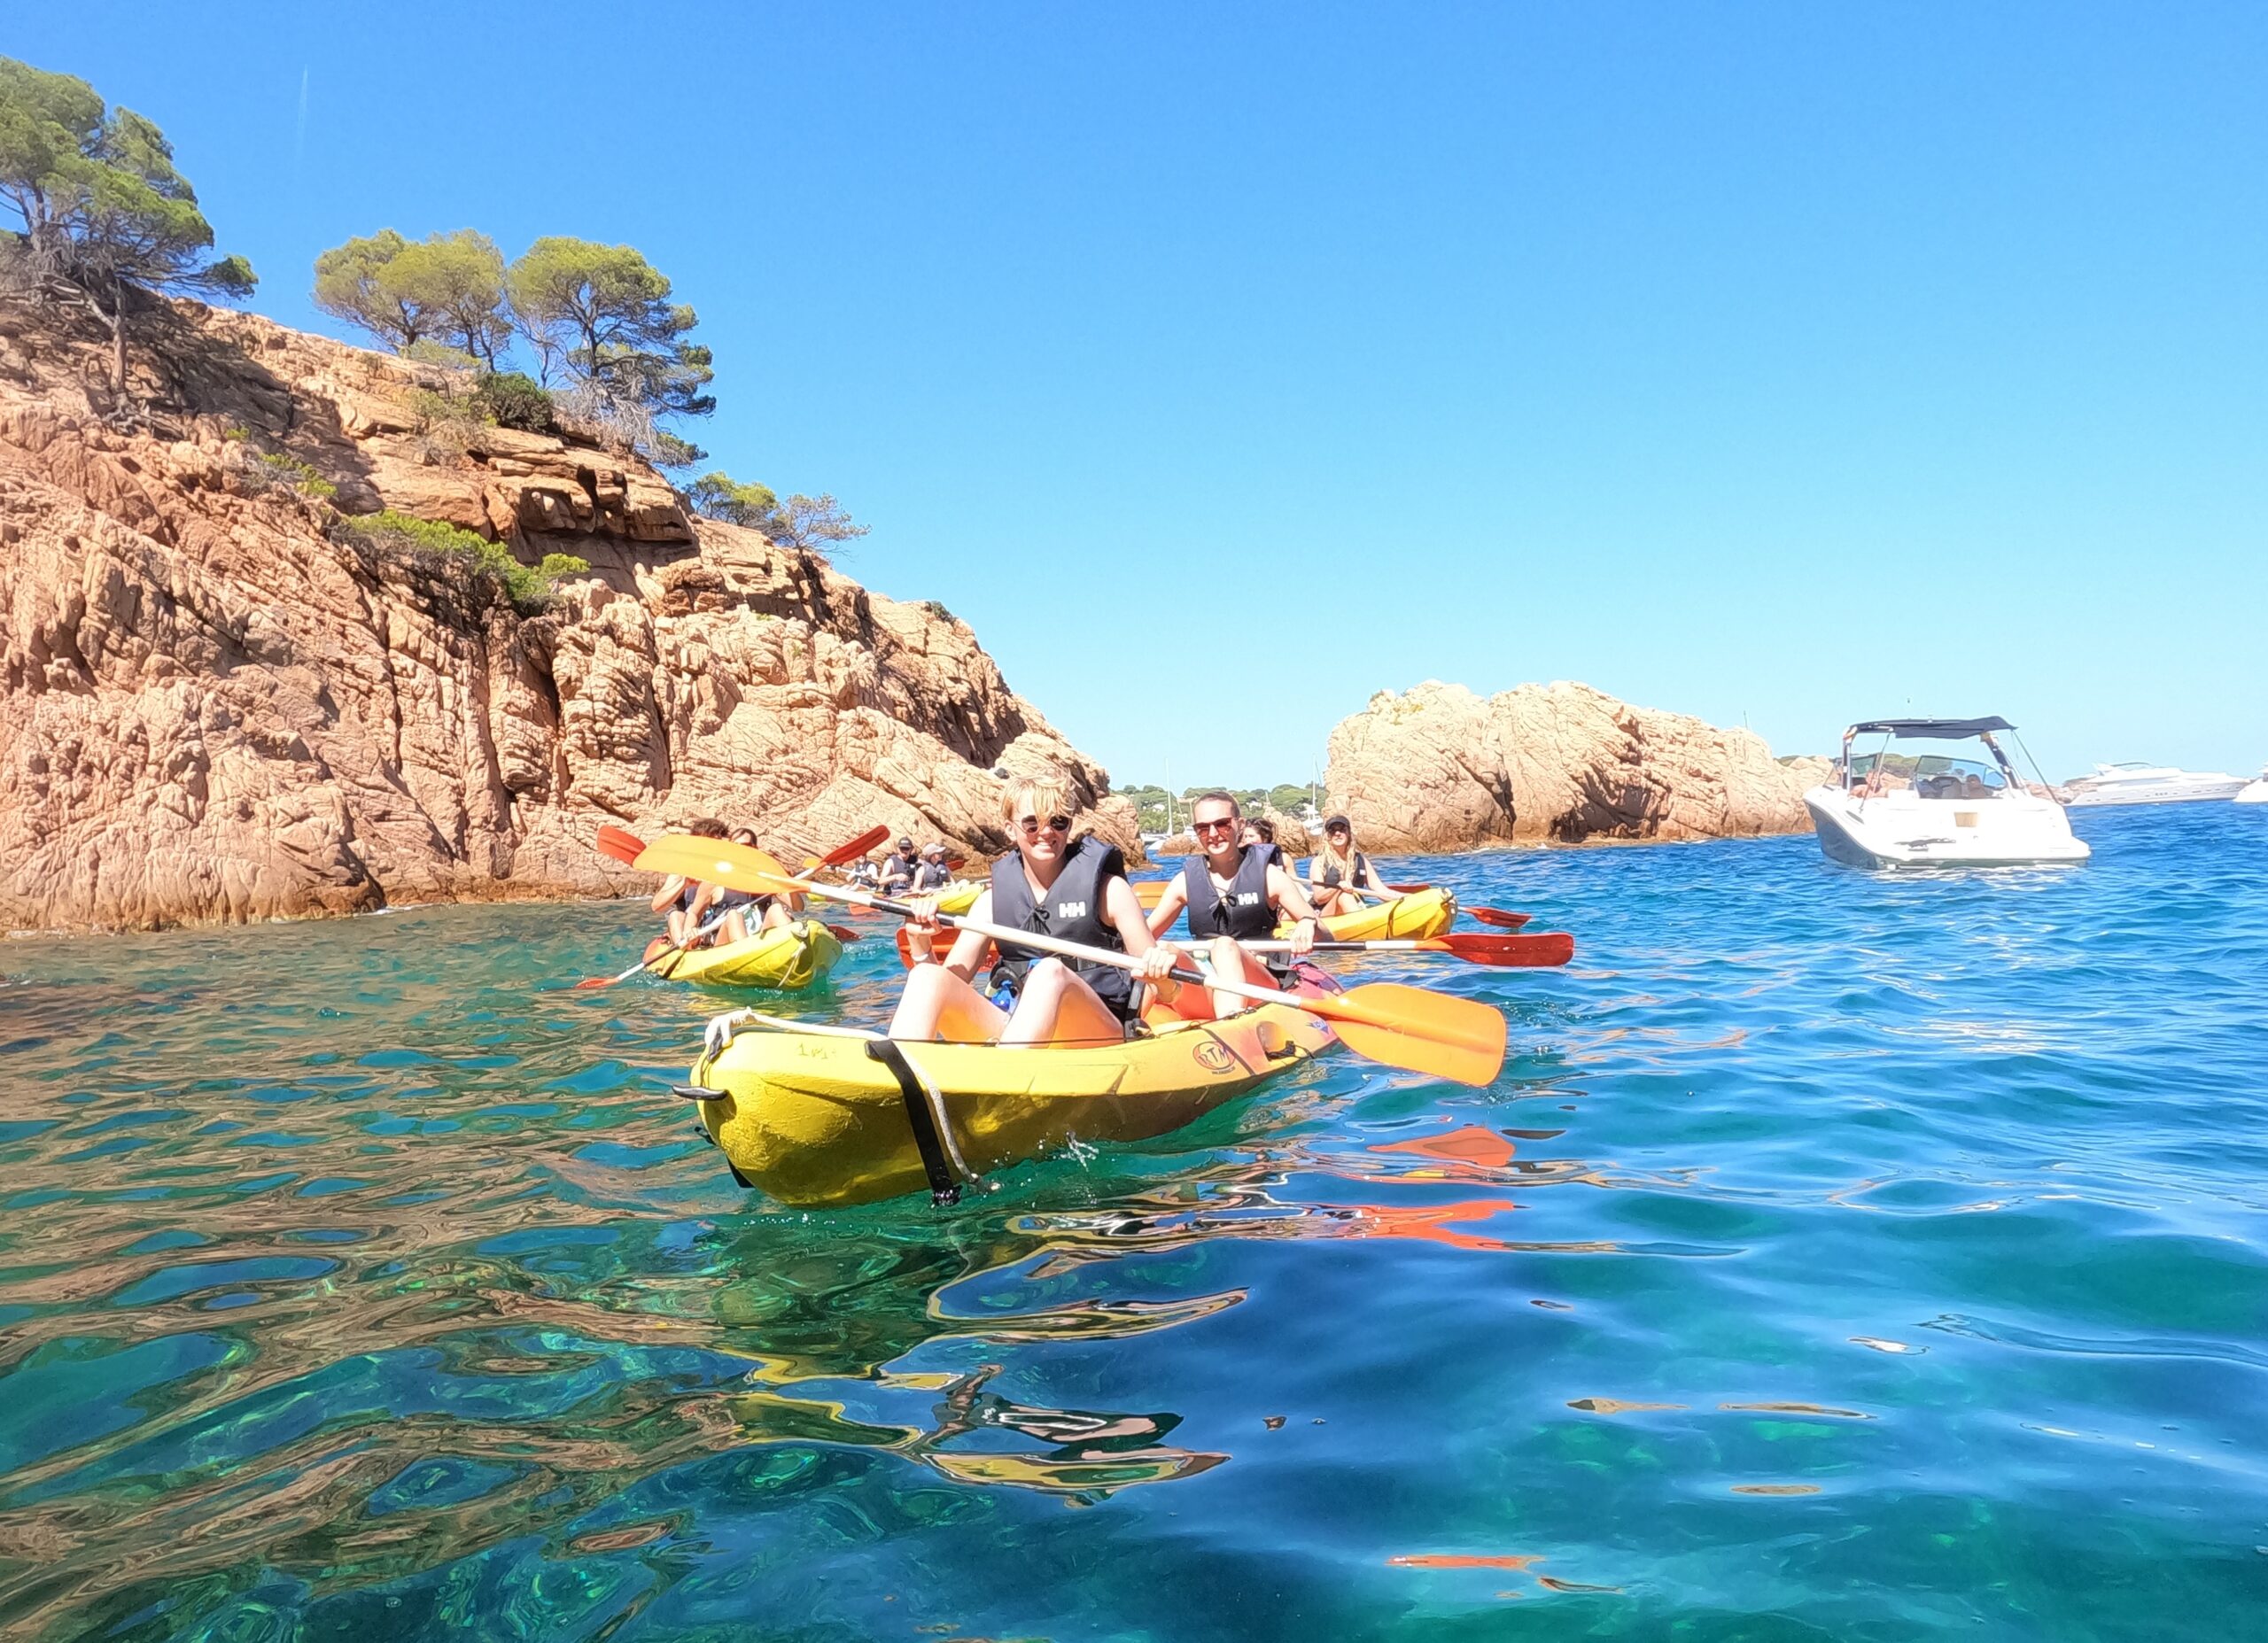 Kayak tours from Barcelona to the Costa Brava Spain